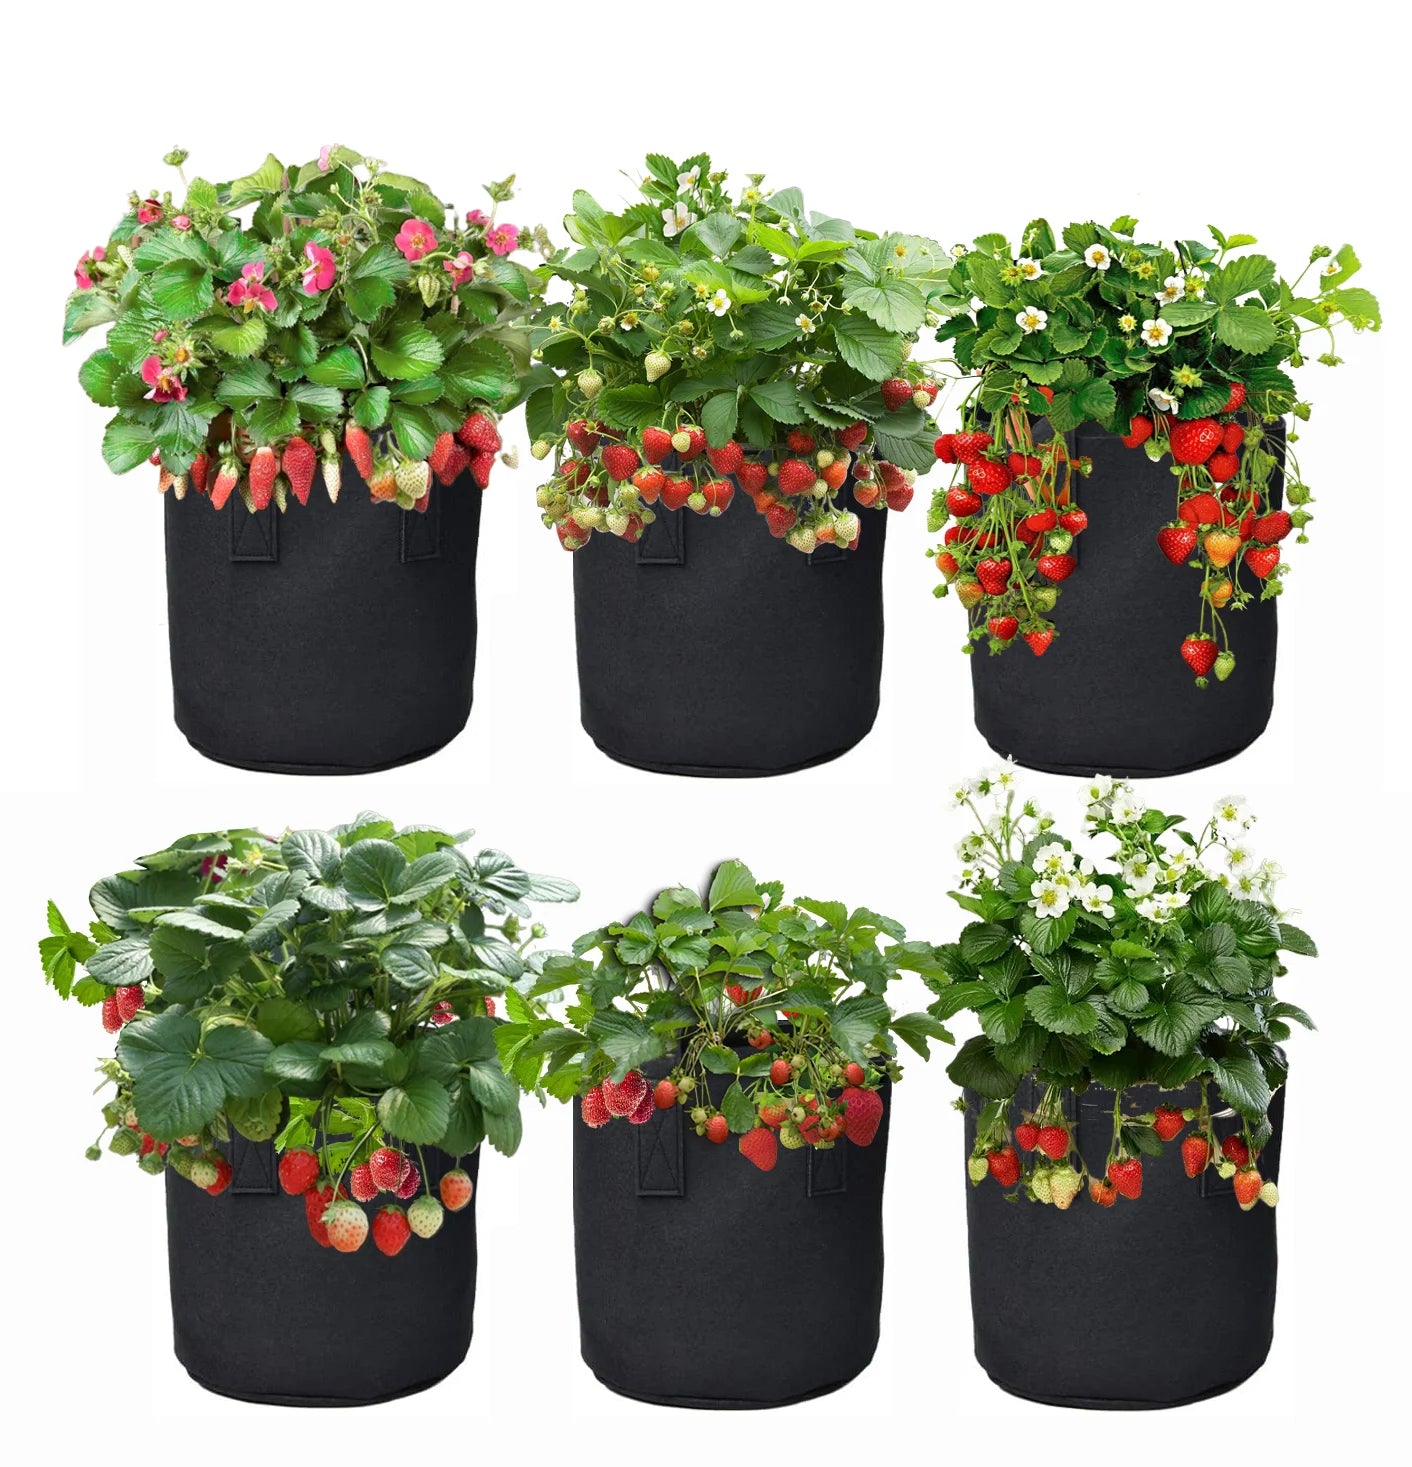 Grow Greener Plant Your Garden in Grow Green Fabic Garden Pot / Bags. Plant all your garden in Grow Bags and save your self time, No need to get your big tiller out. plant in Grow Bags make gardening easy. Where to buy Grow Bags/ Pot. Buy Buy, Buy now.